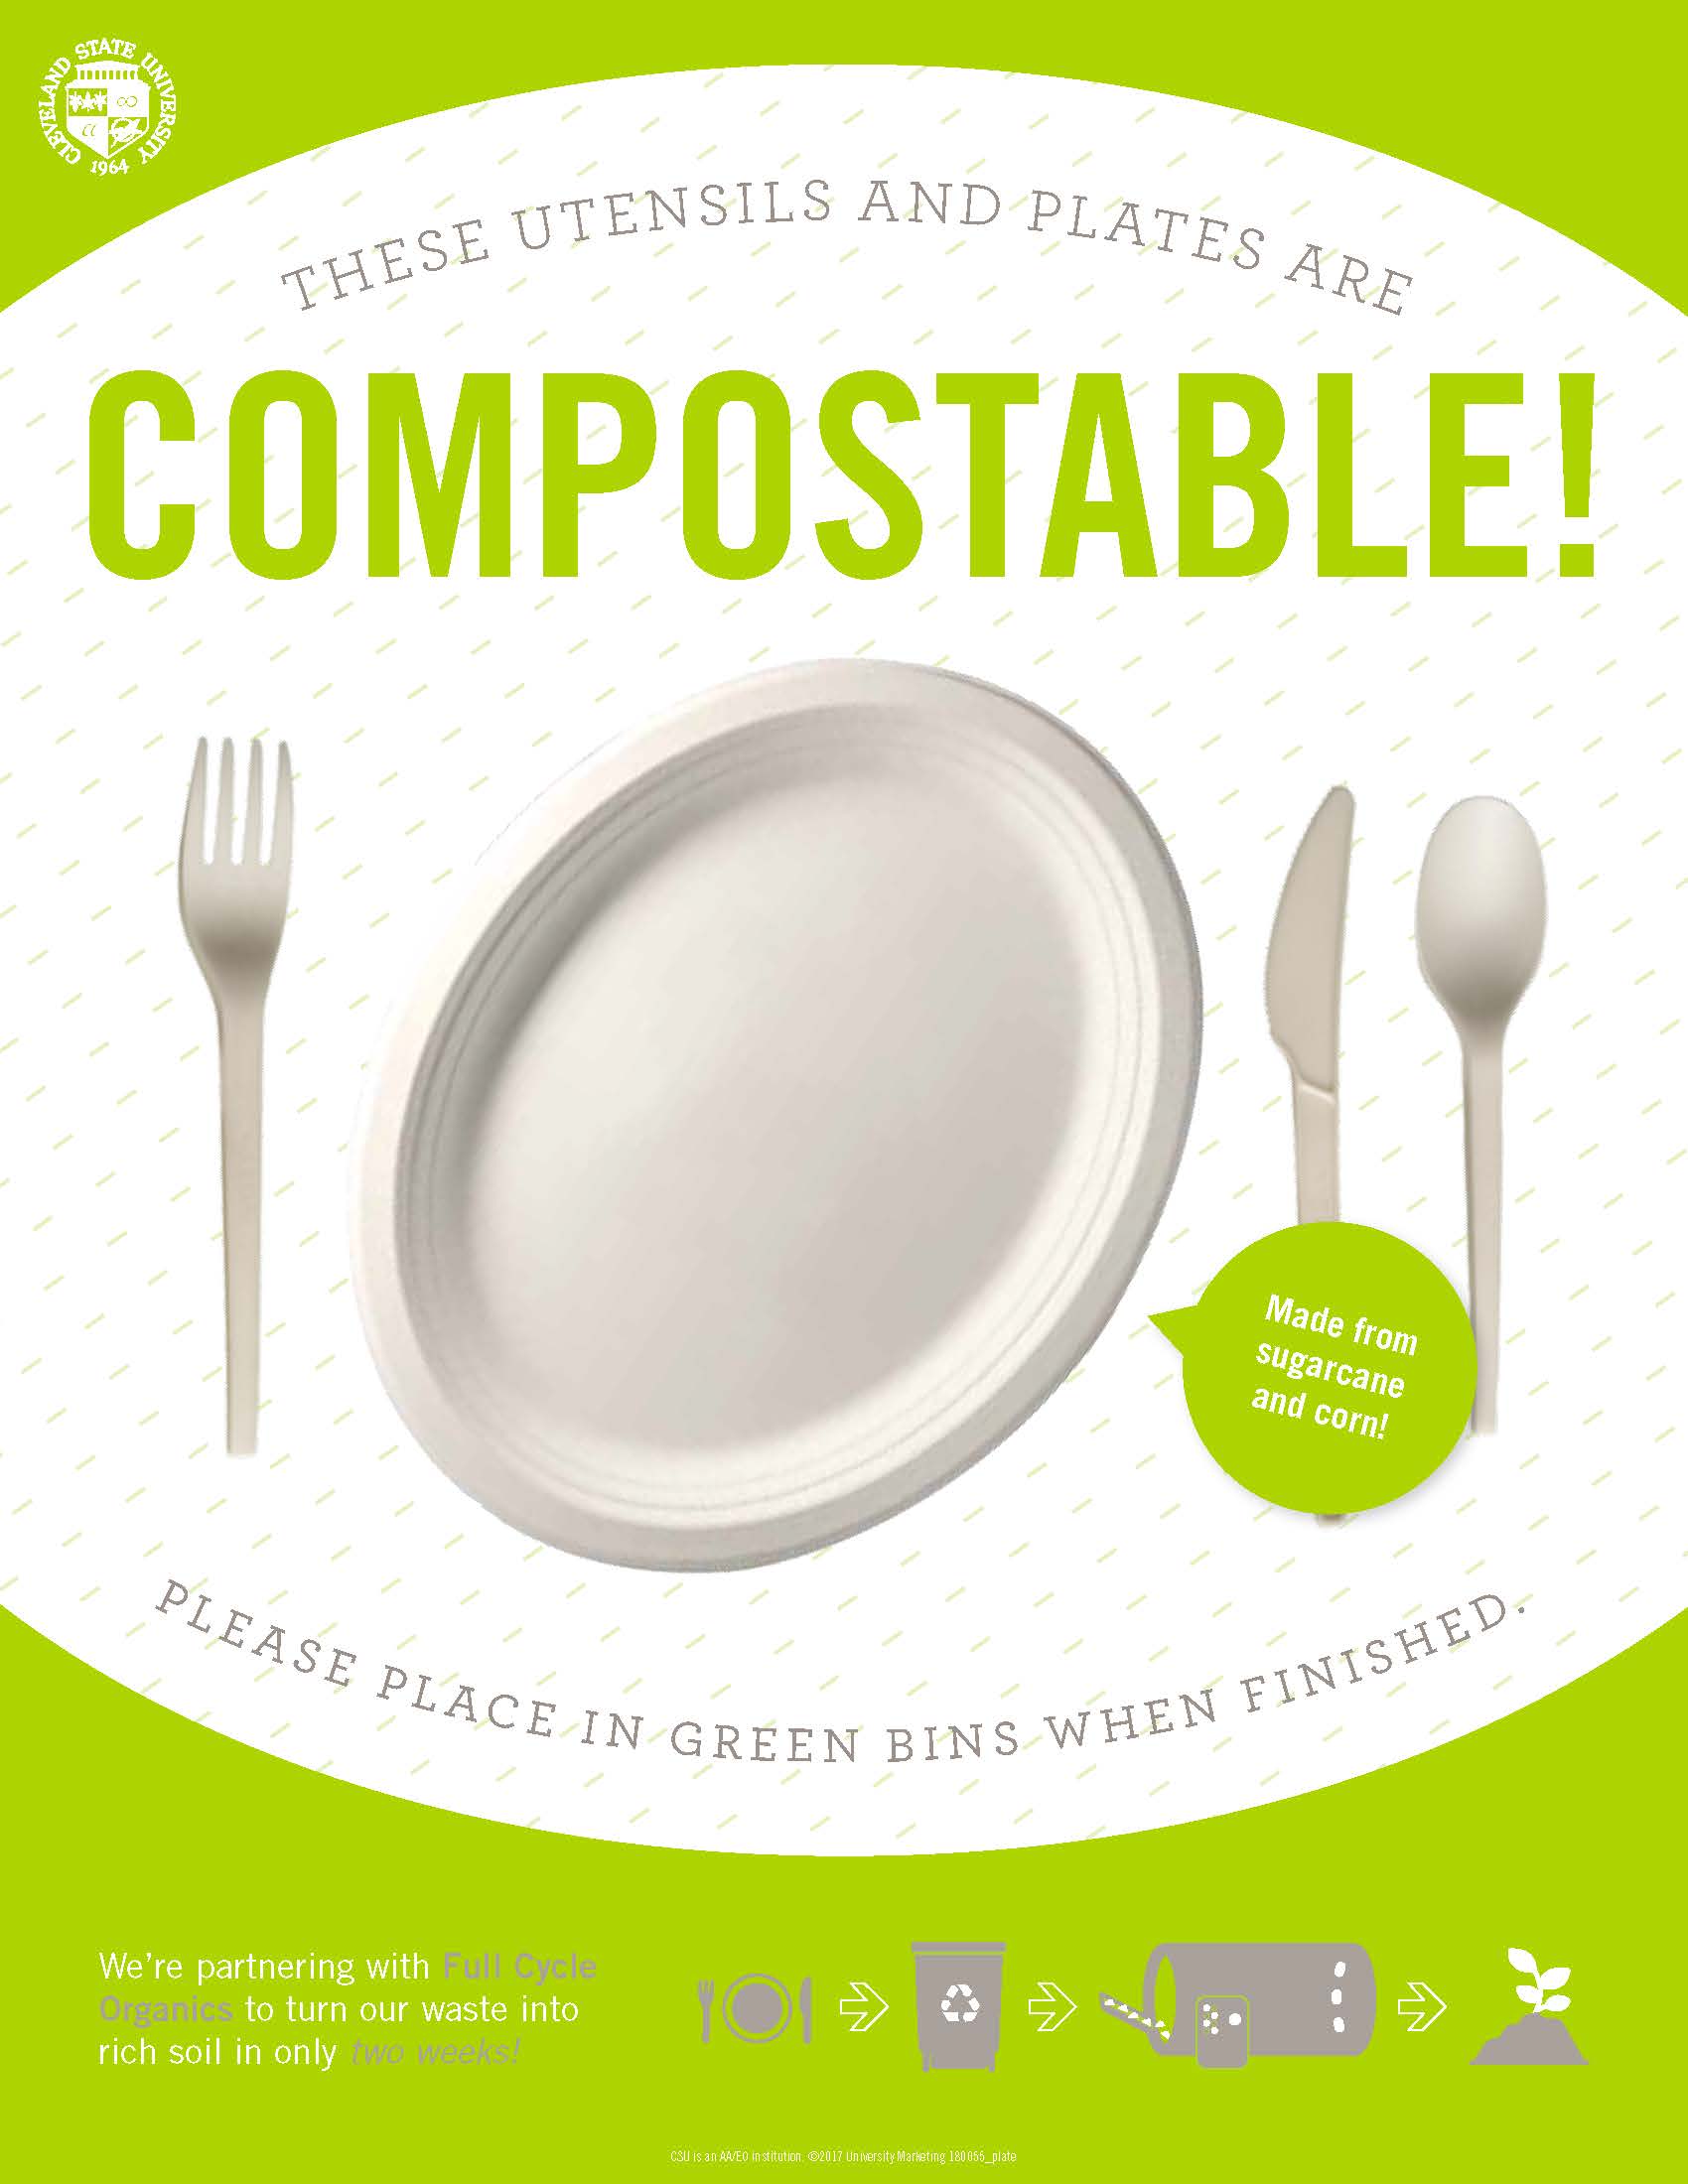 Compostable Plates and Utensils